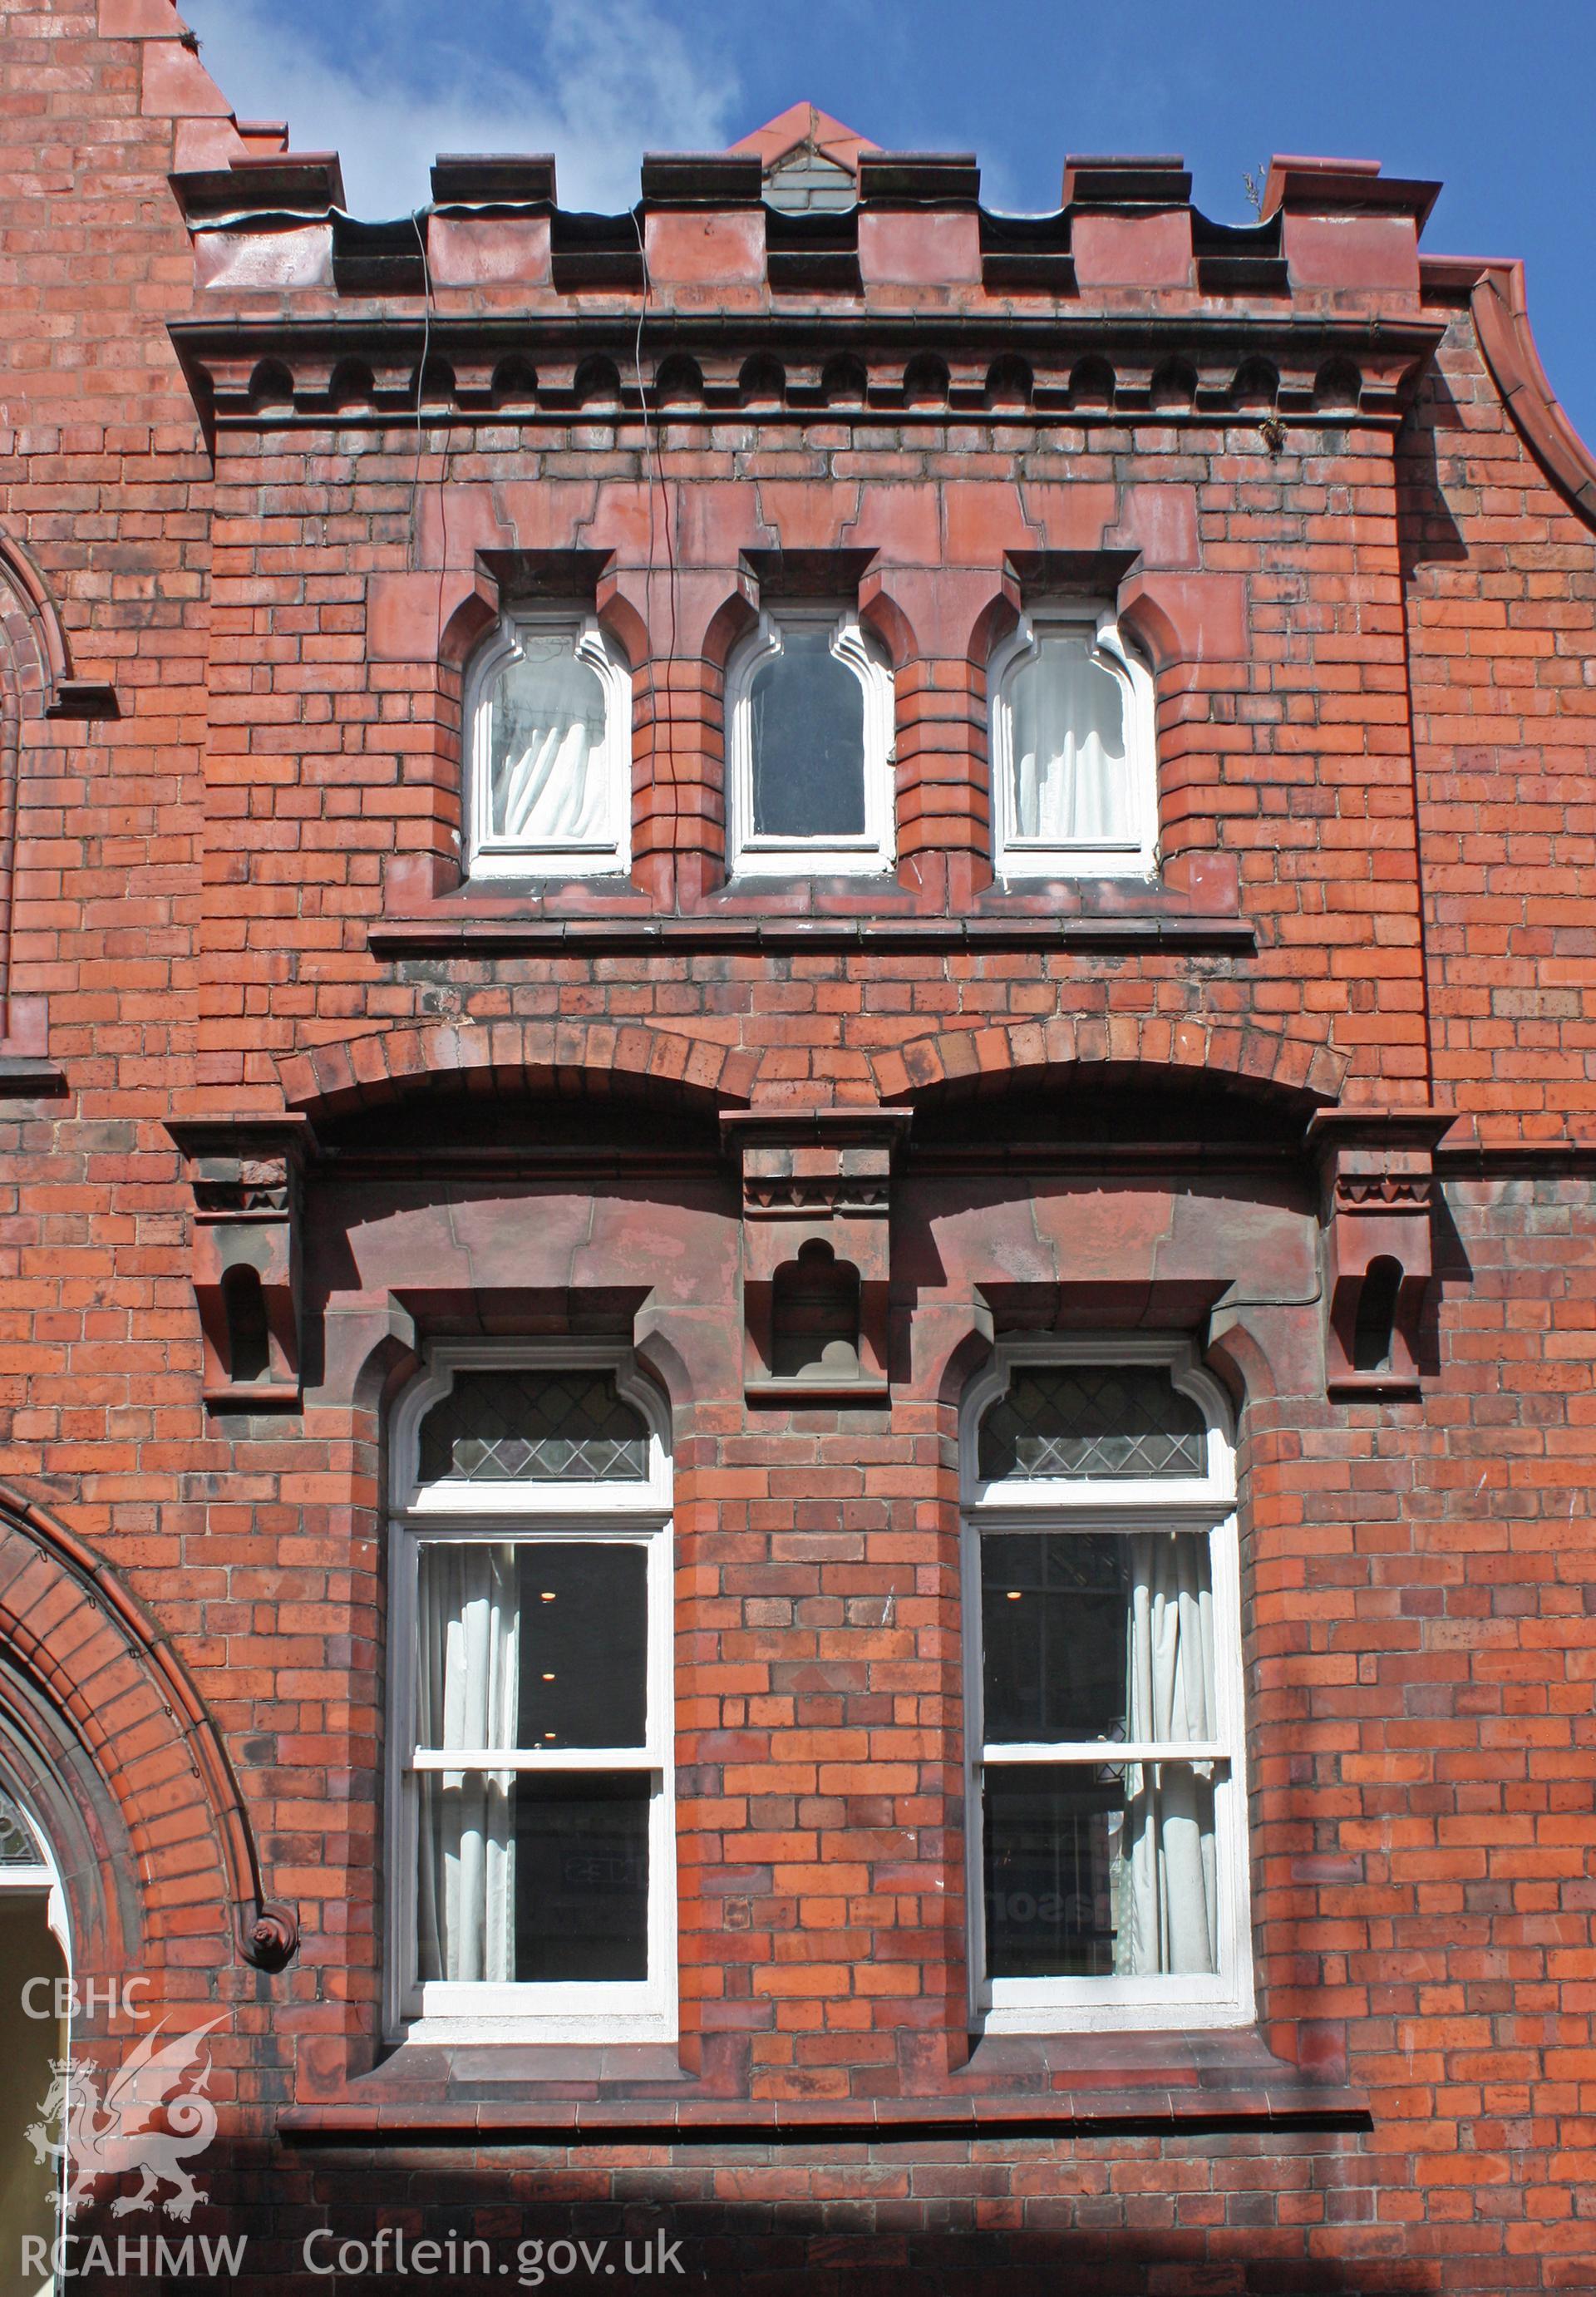 Colour photograph showing exterior view of windows at Denbigh Conservative or Constitutional Club, Photographed during survey conducted by Geoff Ward on 19th July 2012.